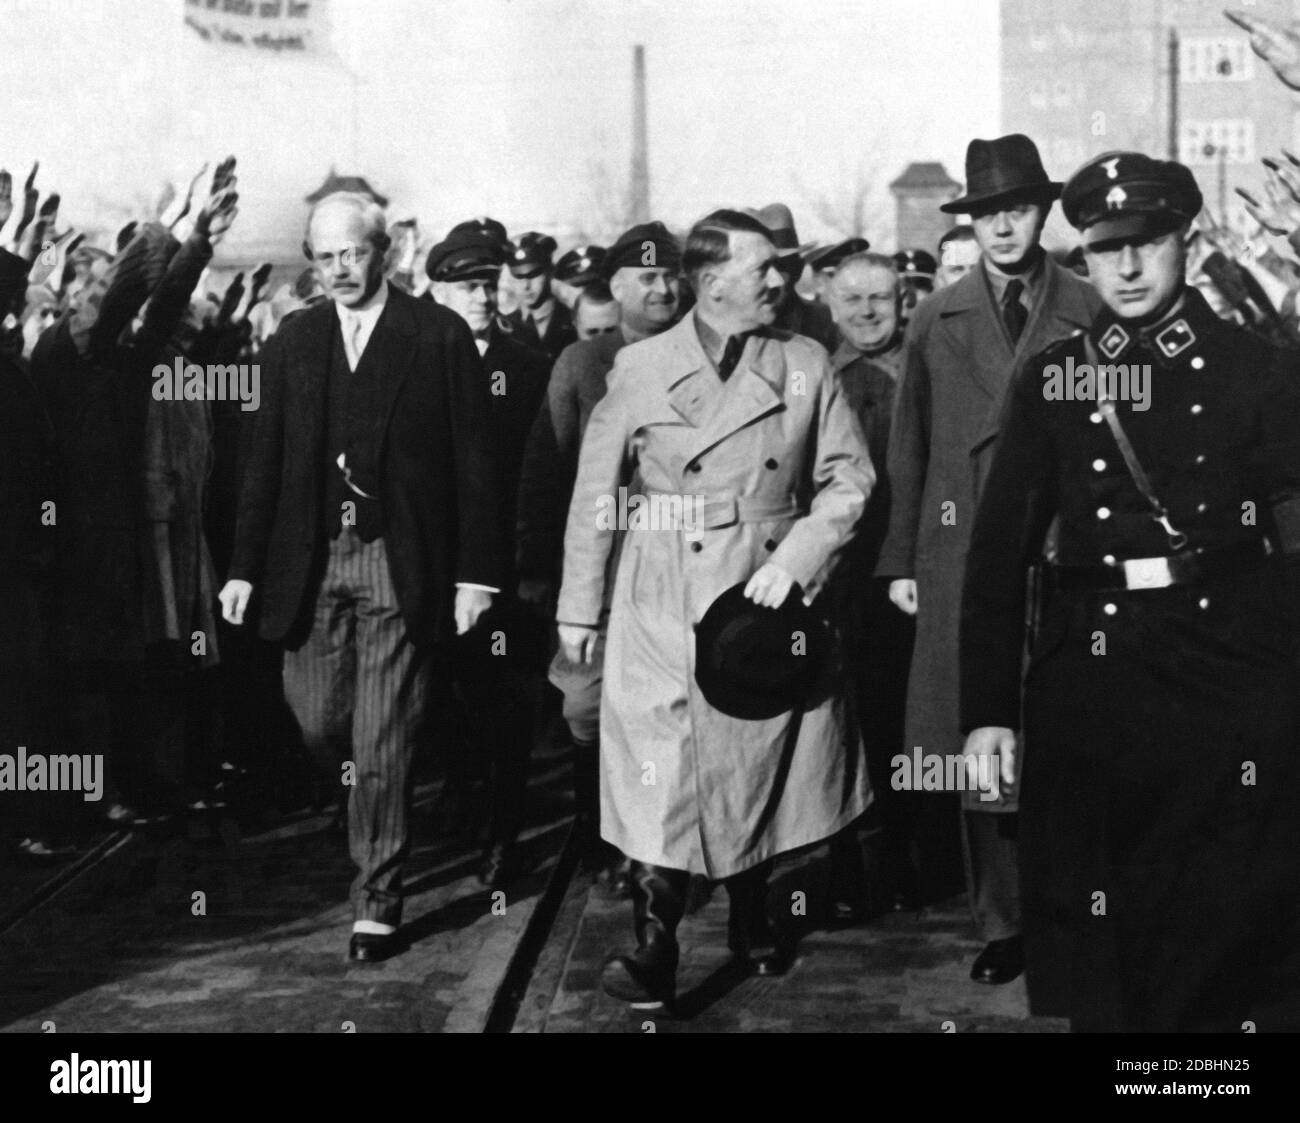 At a works meeting of Siemens Werke in Berlin, Carl Friedrich von Siemens and Adolf Hitler are accompanied by other Siemens employees and members of the SS. Stock Photo